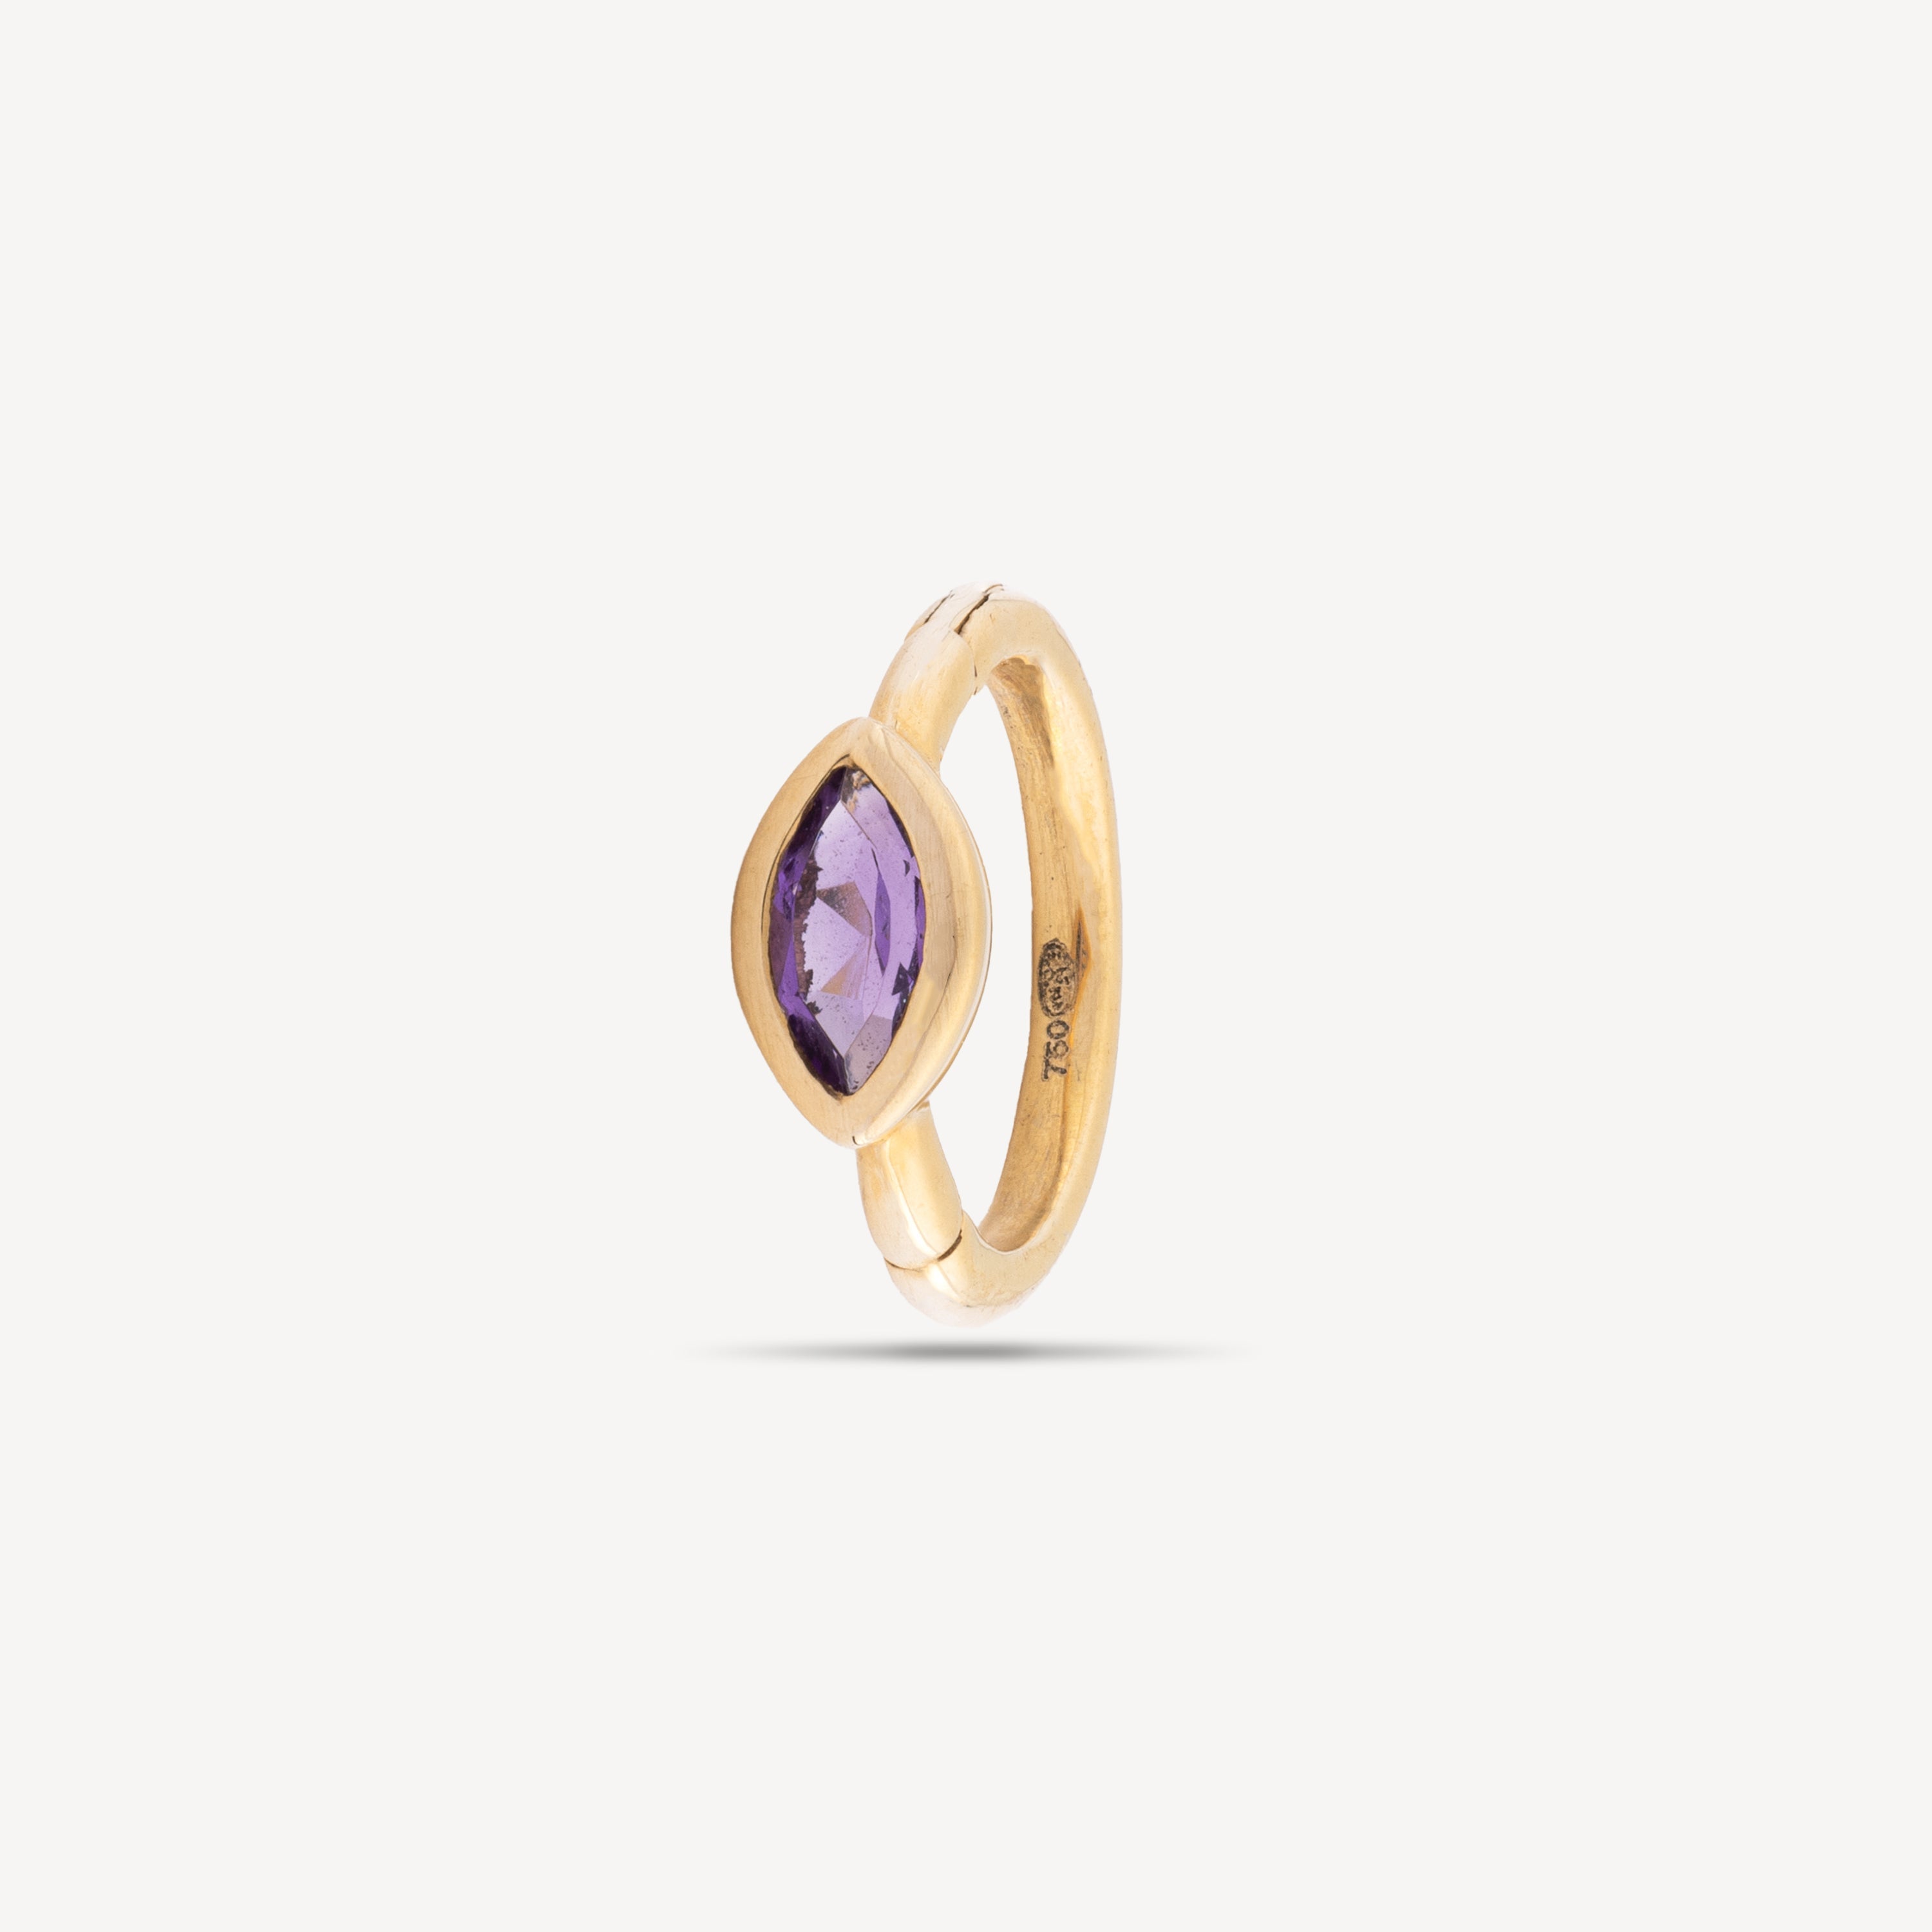 Yellow gold 3x2mm marquise amethyst 6.5mm hoop